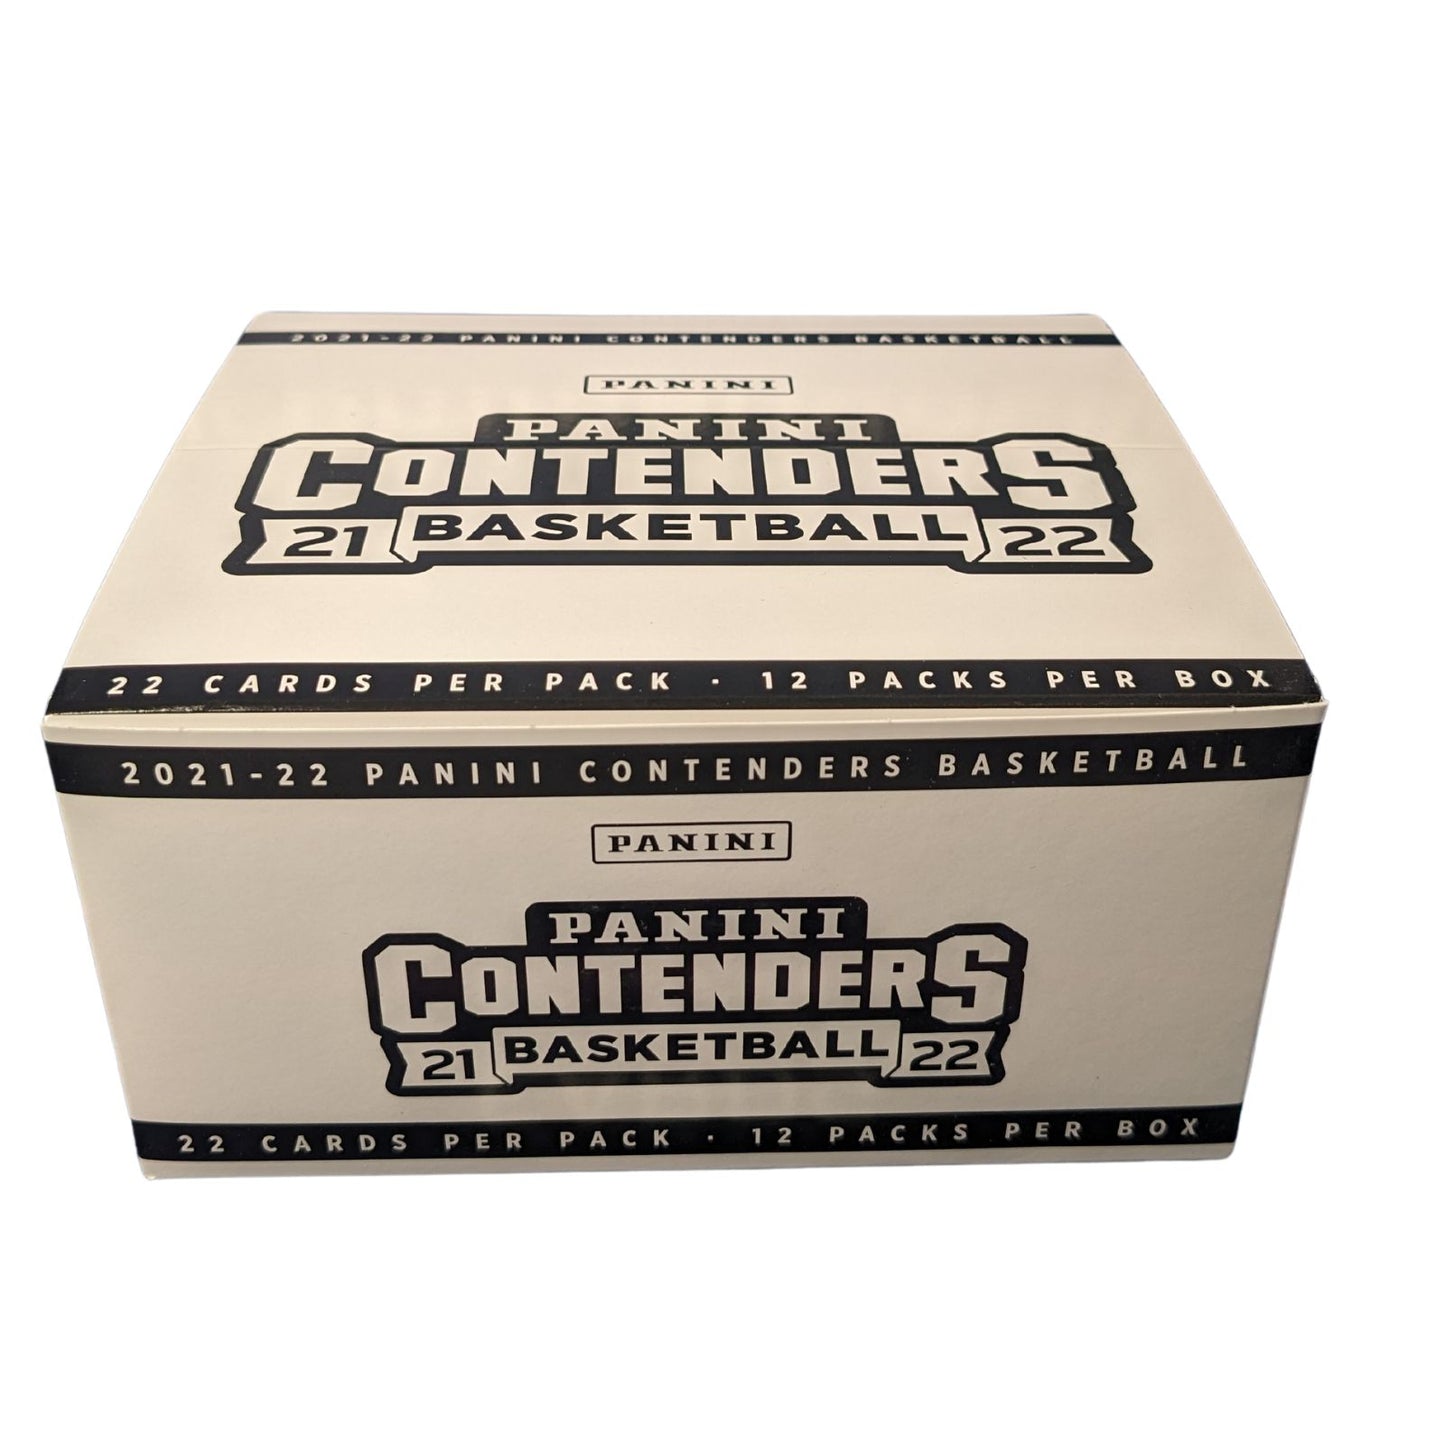 2021-22 Panini Contenders Basketball Cello / Value / Fat Pack Box (12 Packs)